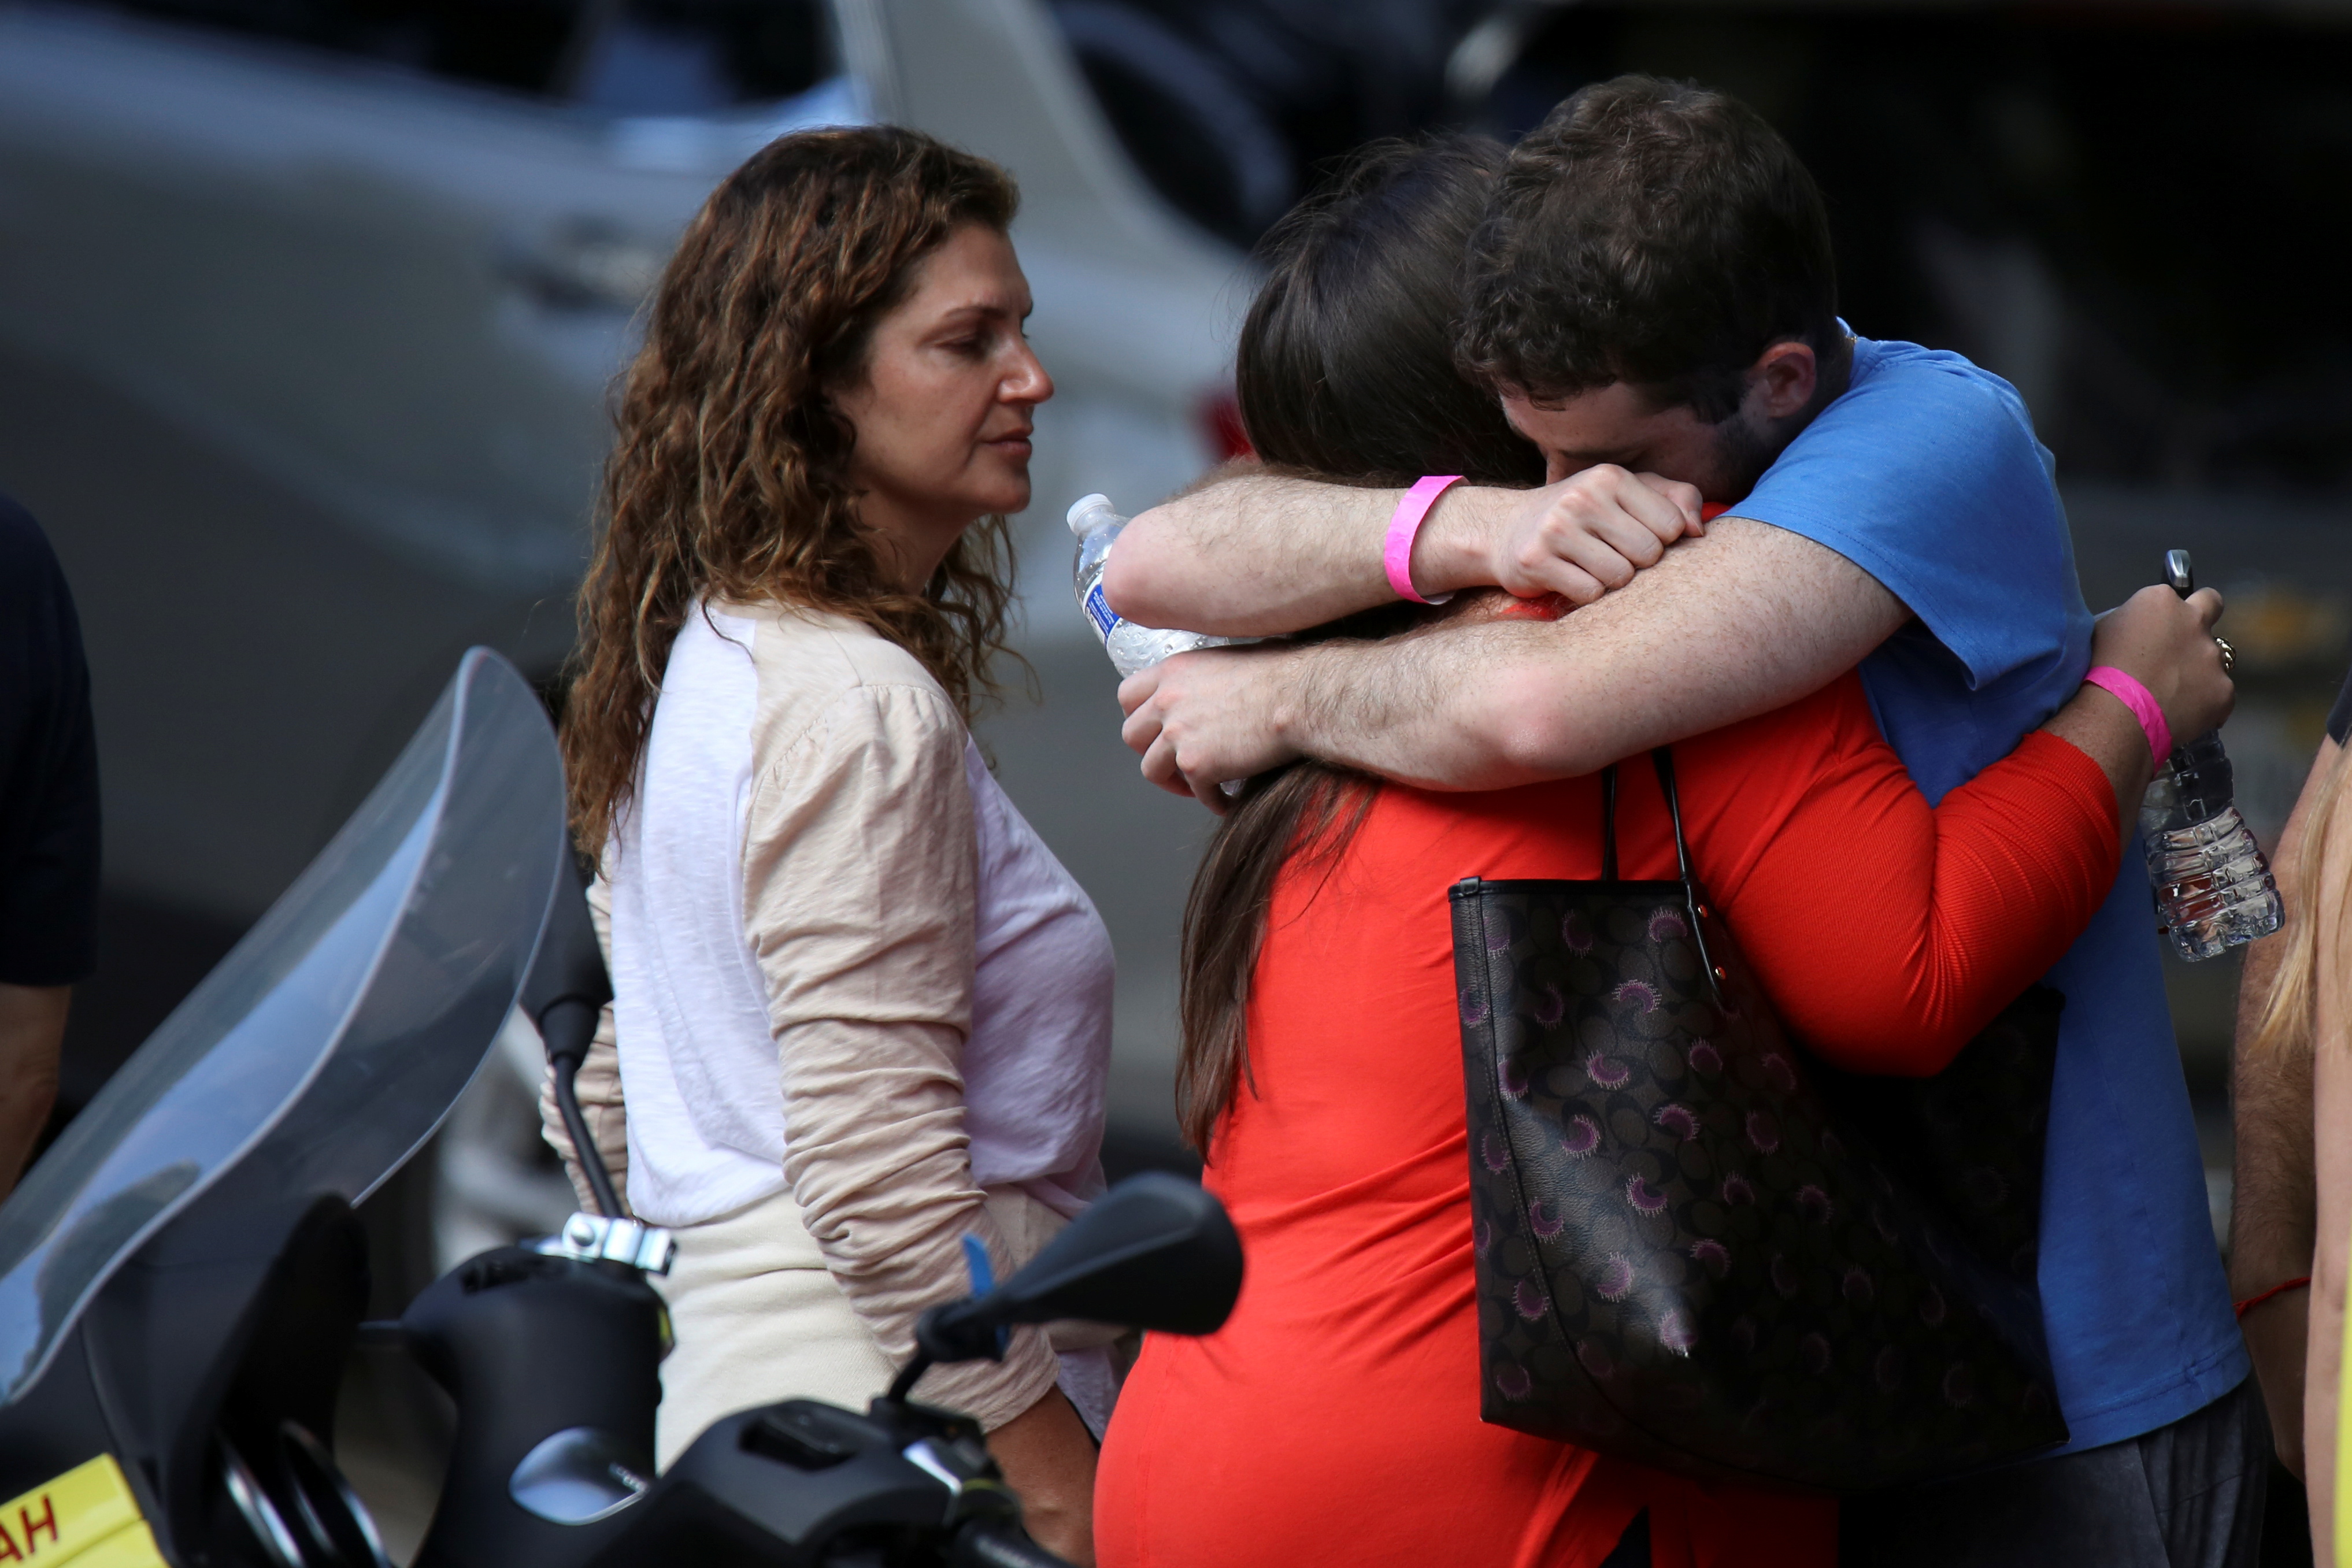 Family members of those reported missing embrace each other at the entrance of a hotel after visiting the site of a partially collapsed residential building in Surfside, near Miami Beach, Florida, U.S. June 27, 2021. REUTERS/Marco Bello